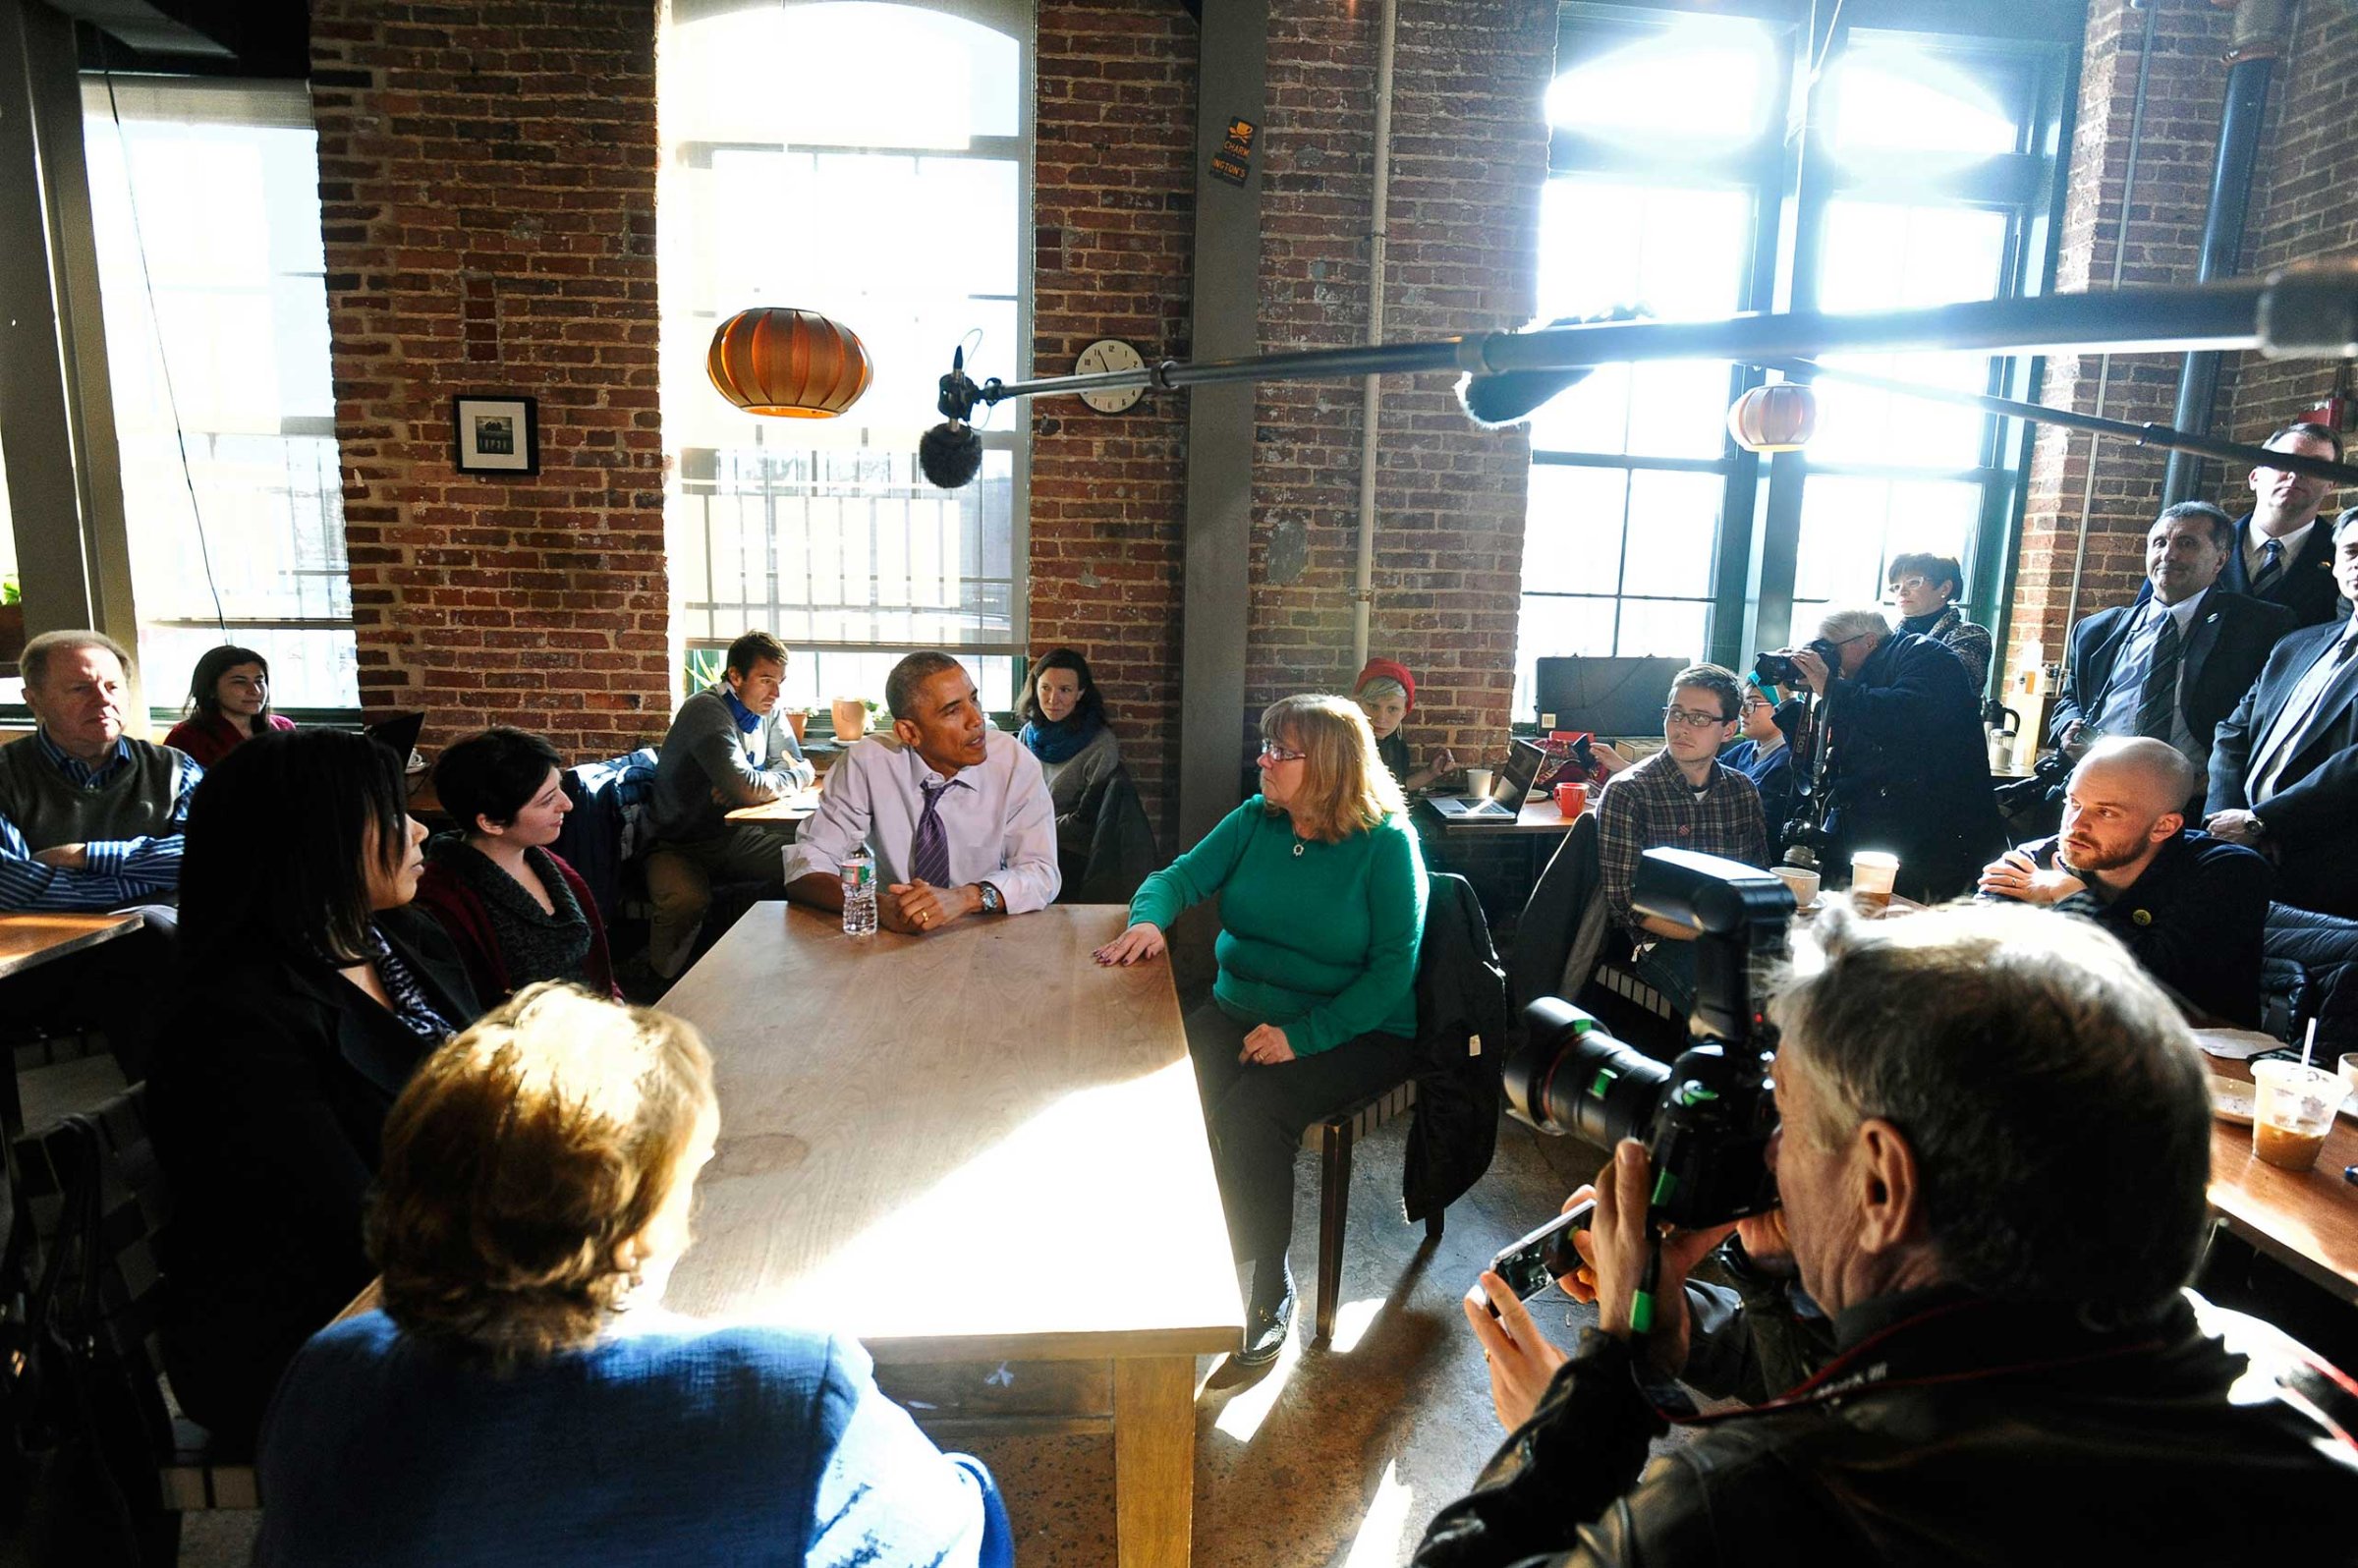 President Barack Obama eats lunch at Charmington's Cafe with Vika Jordan, Amanda Rothschild, and Mary Stein to discuss the needs of all Americans as they balance their families and jobs on Jan. 15, 2015 in Baltimore.